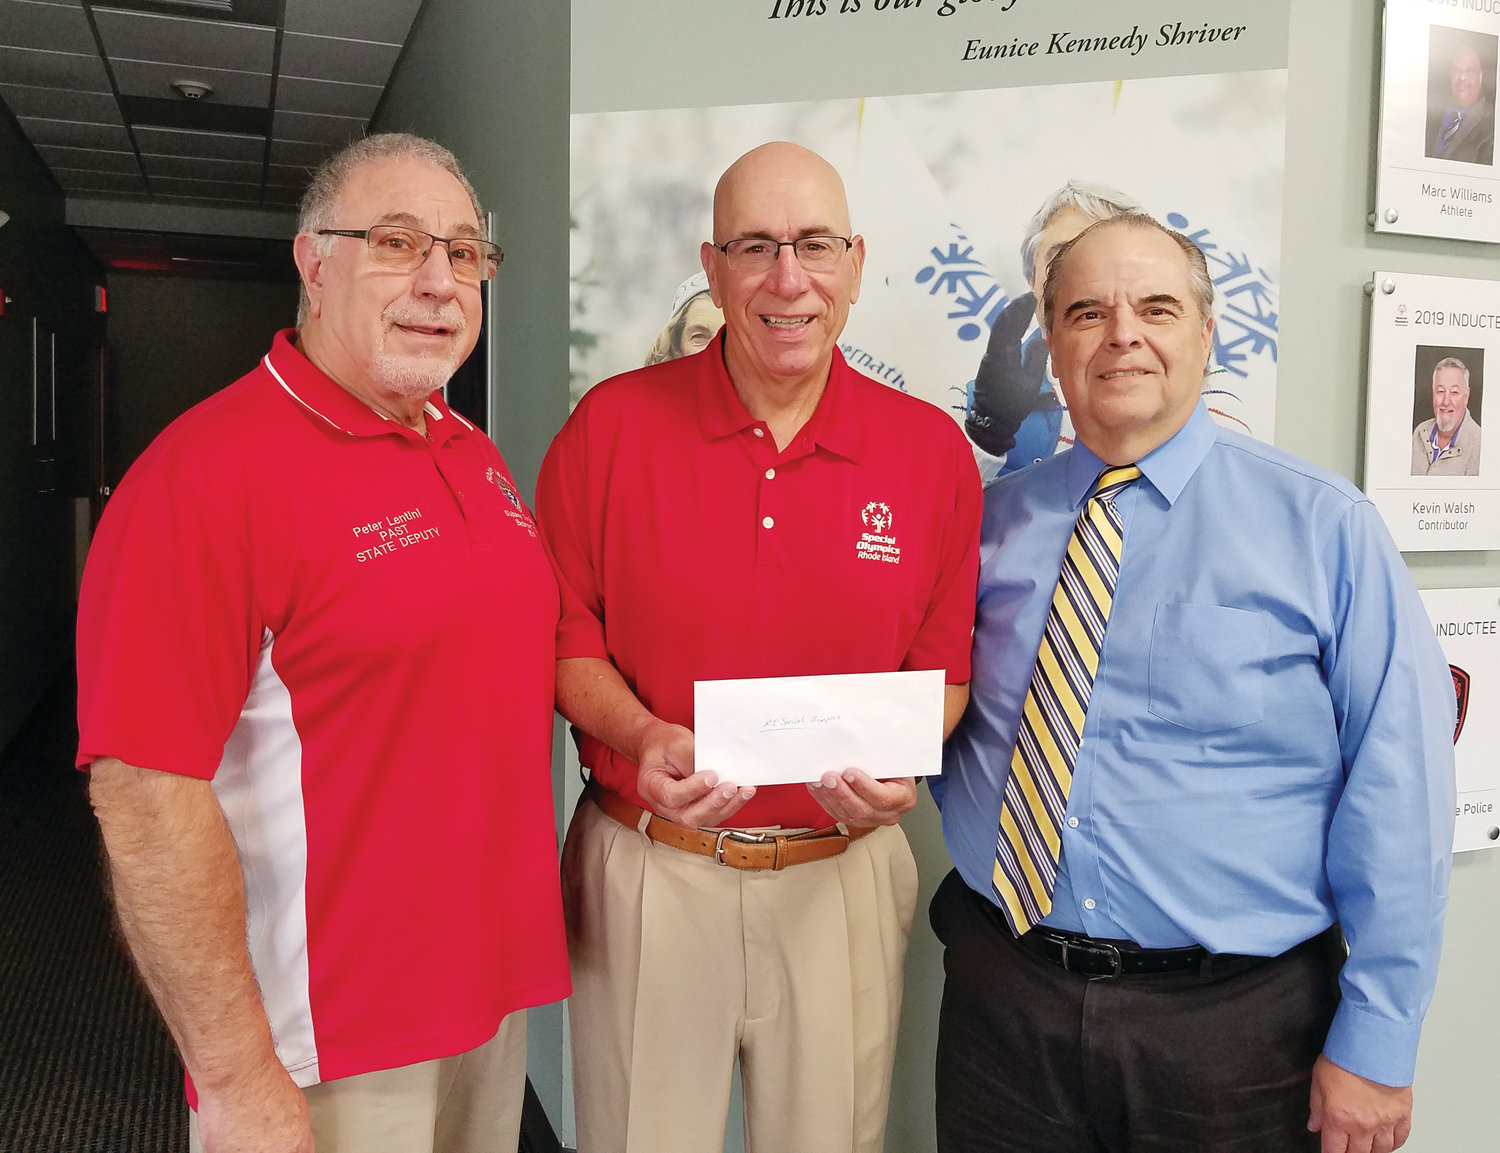 Knights with hearts of gold help Special Olympics: The East Providence Council 1528 Knights of Columbus presented an $1,100 donation to the R.I. Special Olympics Chief Executive Officer Dennis DeJesus. The check represented the proceeds from the council’s “Great Bowls of Fire” chili cook-off competition. Pictured from left, Peter Lentini, R.I. Knights of Columbus past State Deputy and R.I. Special Olympics board member, Dennis DeJesus, chief executive officer of the R.I. Special Olympics; and Steve Perry, Deputy Grand Knight of Council 1528.